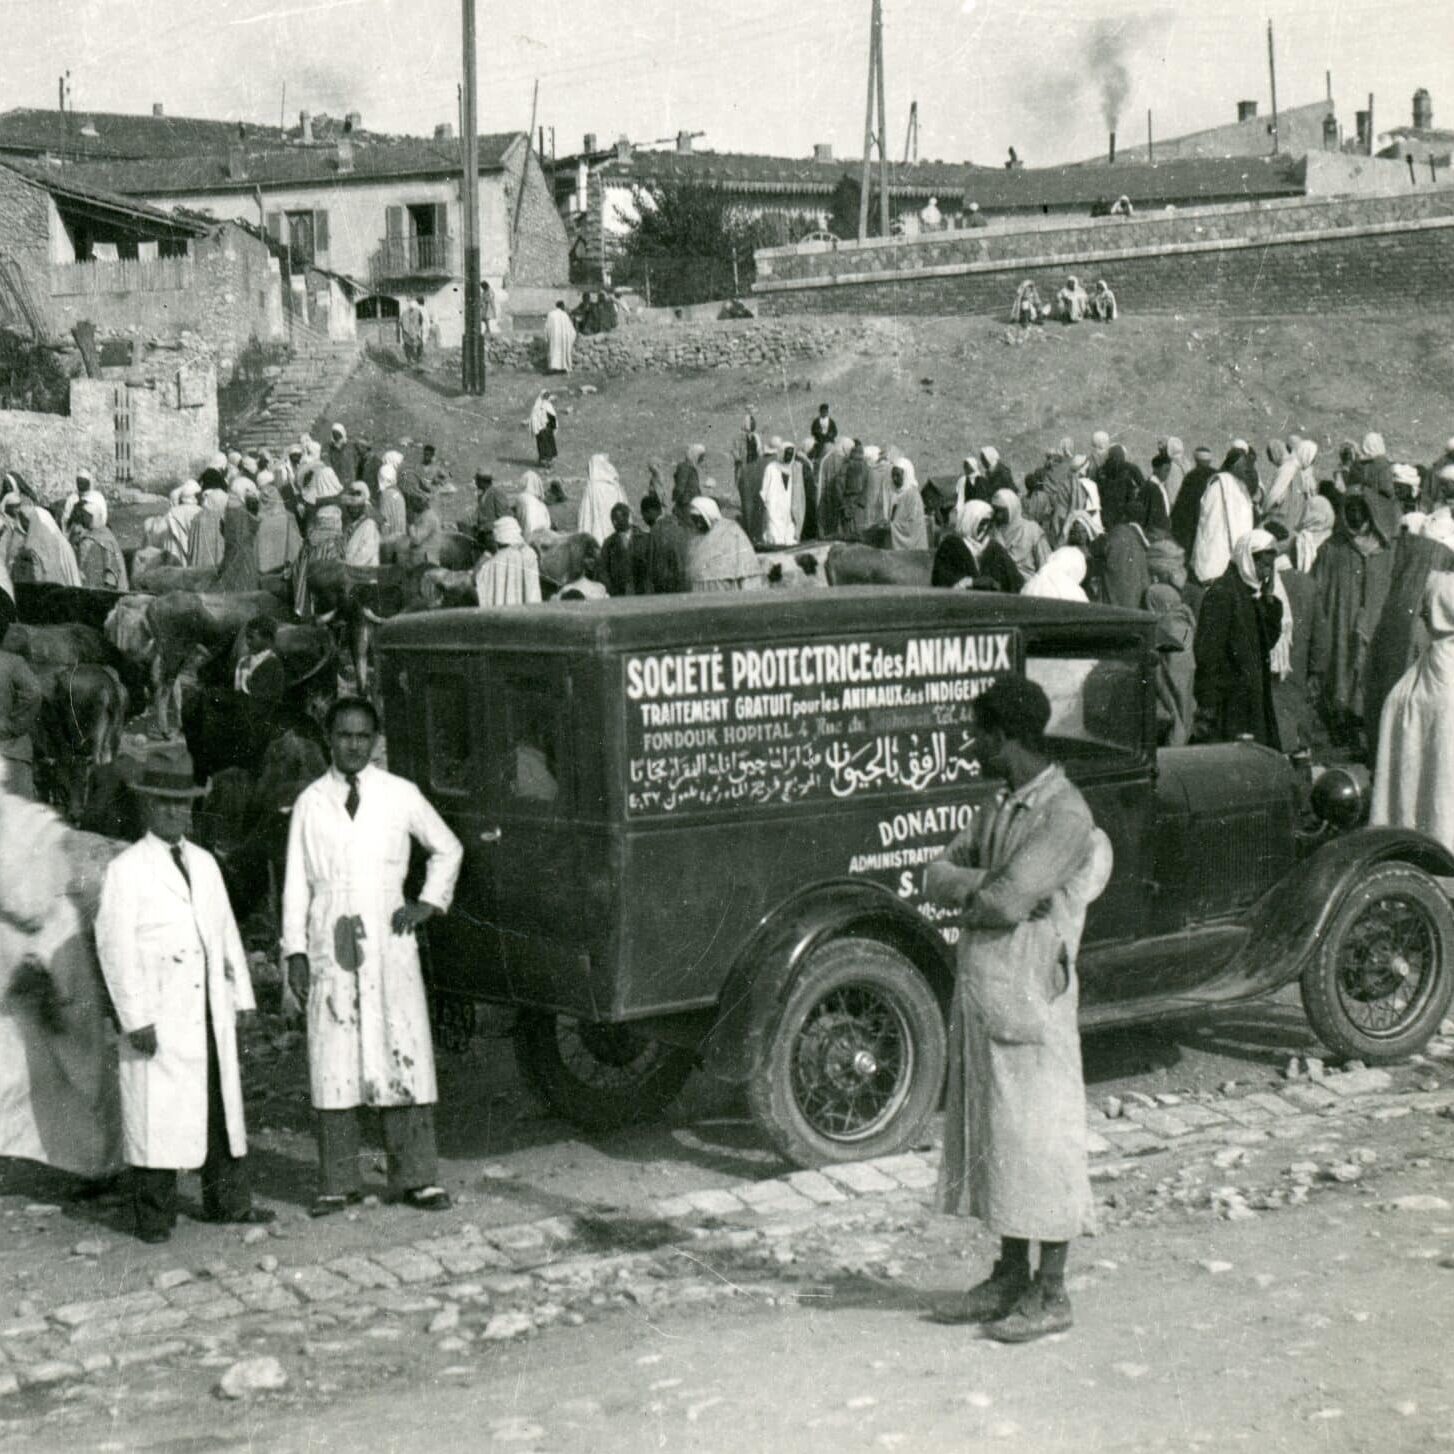 black and white image of SPANA's first mobile clinic, a ford, surrounded by a crowd of people